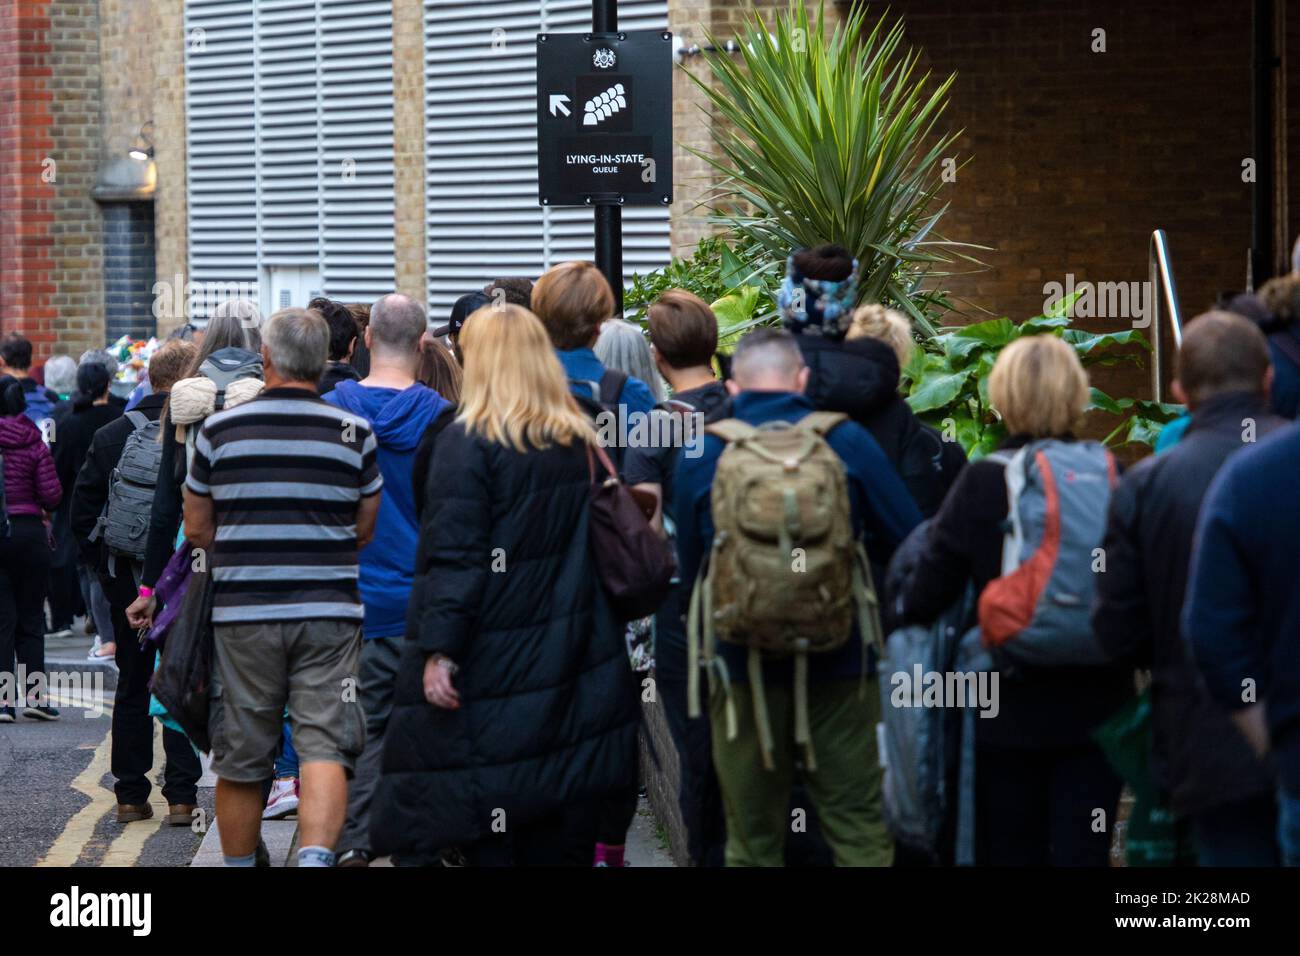 London, UK - September 17th 2022: The Queue on Shad Thames in London, to see the late Queen Elizabeth II Lying-in-State. Stock Photo